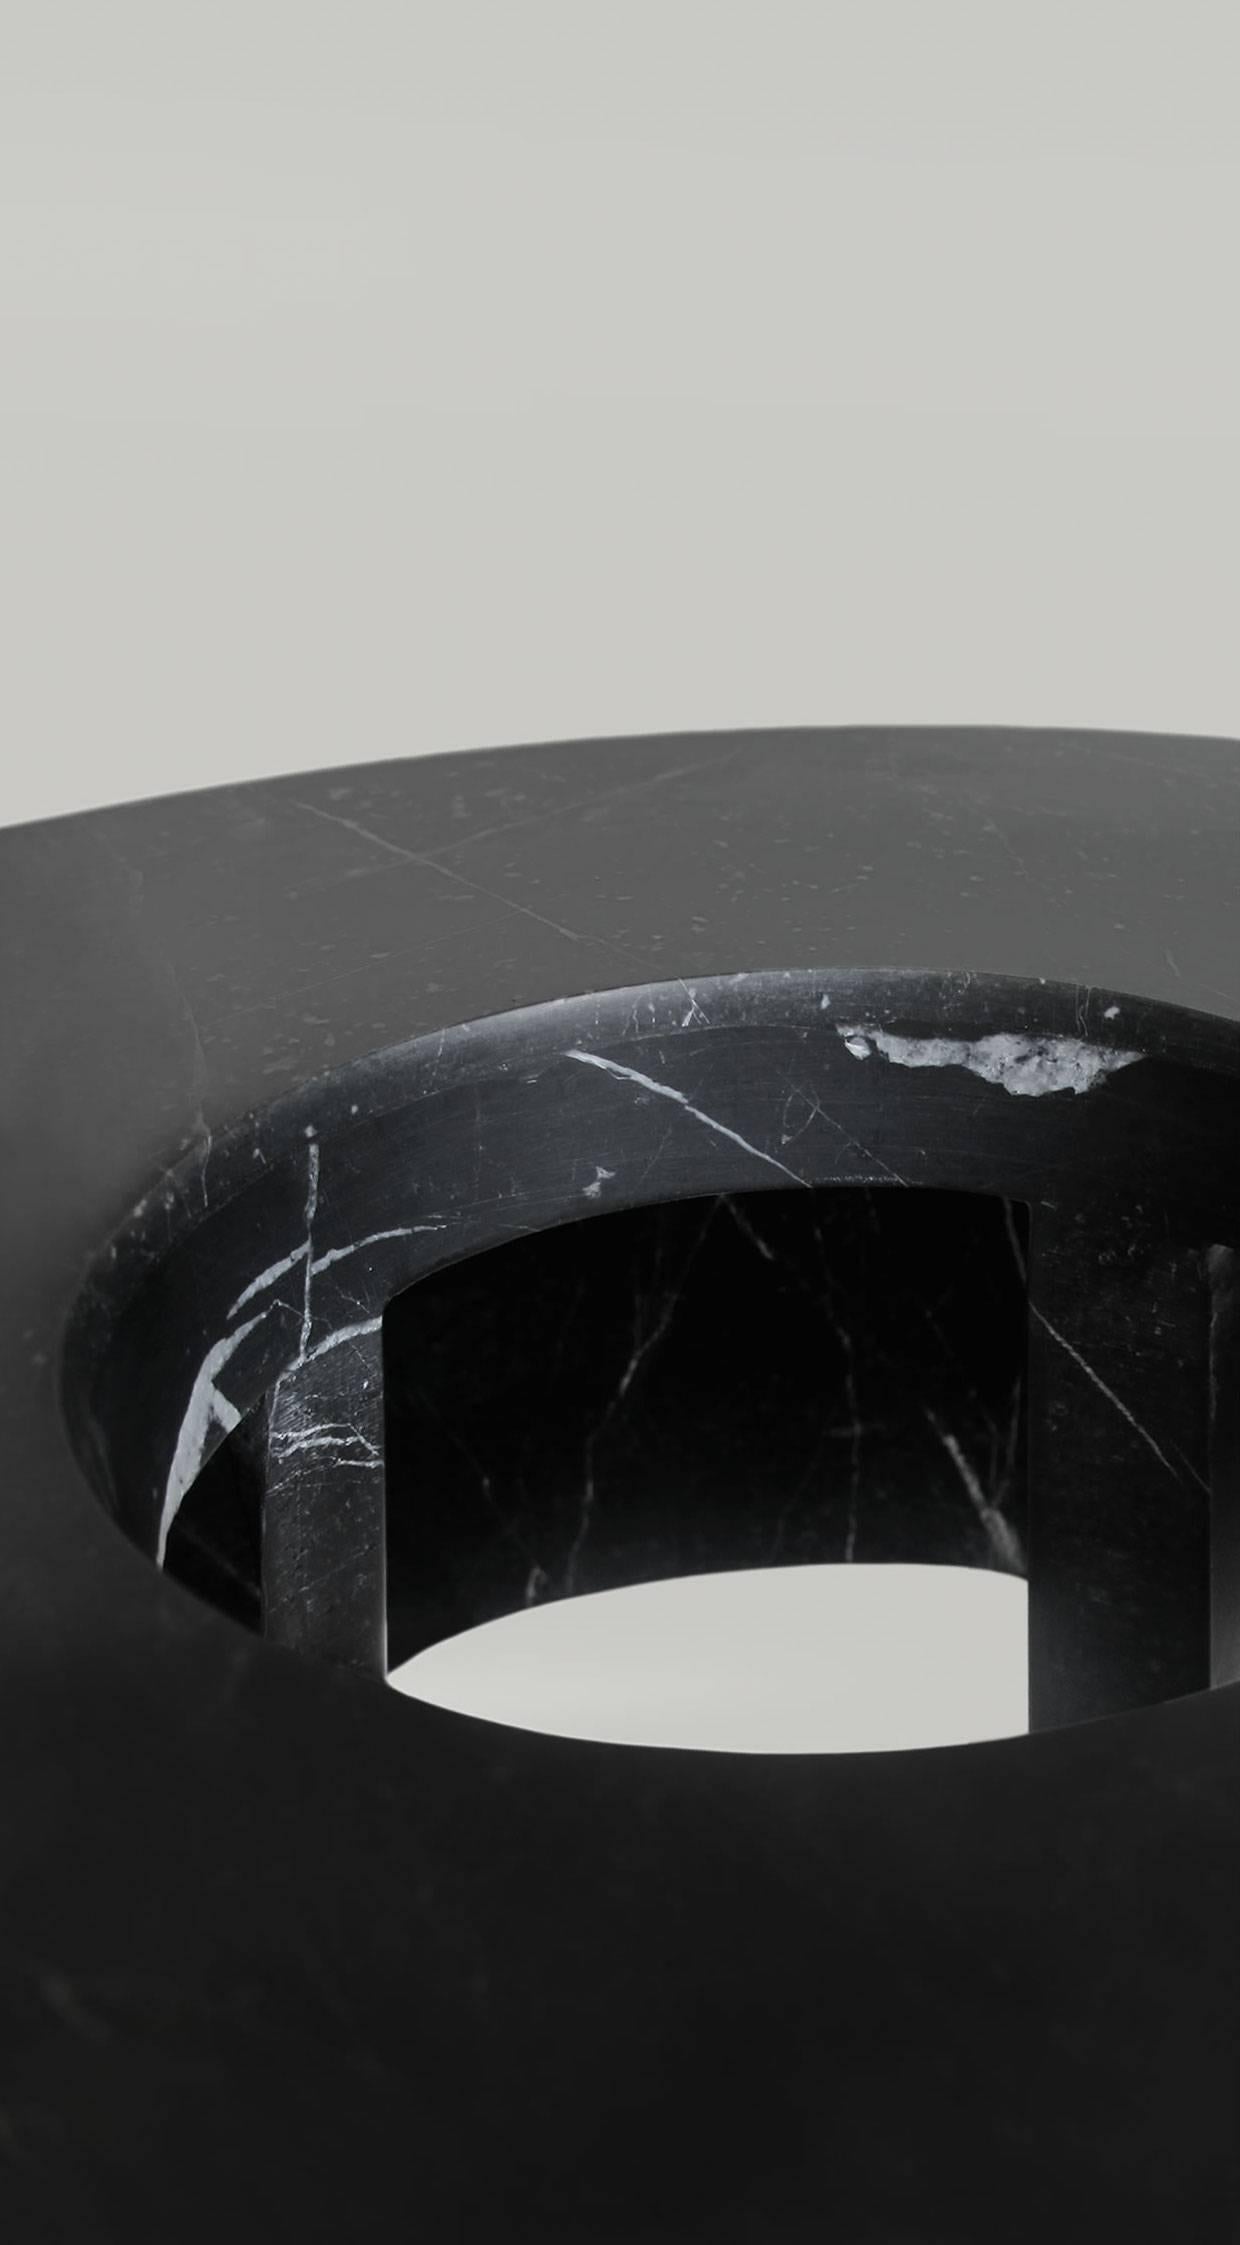 Marble table lamp by Gilles Caffier.

Black marble.